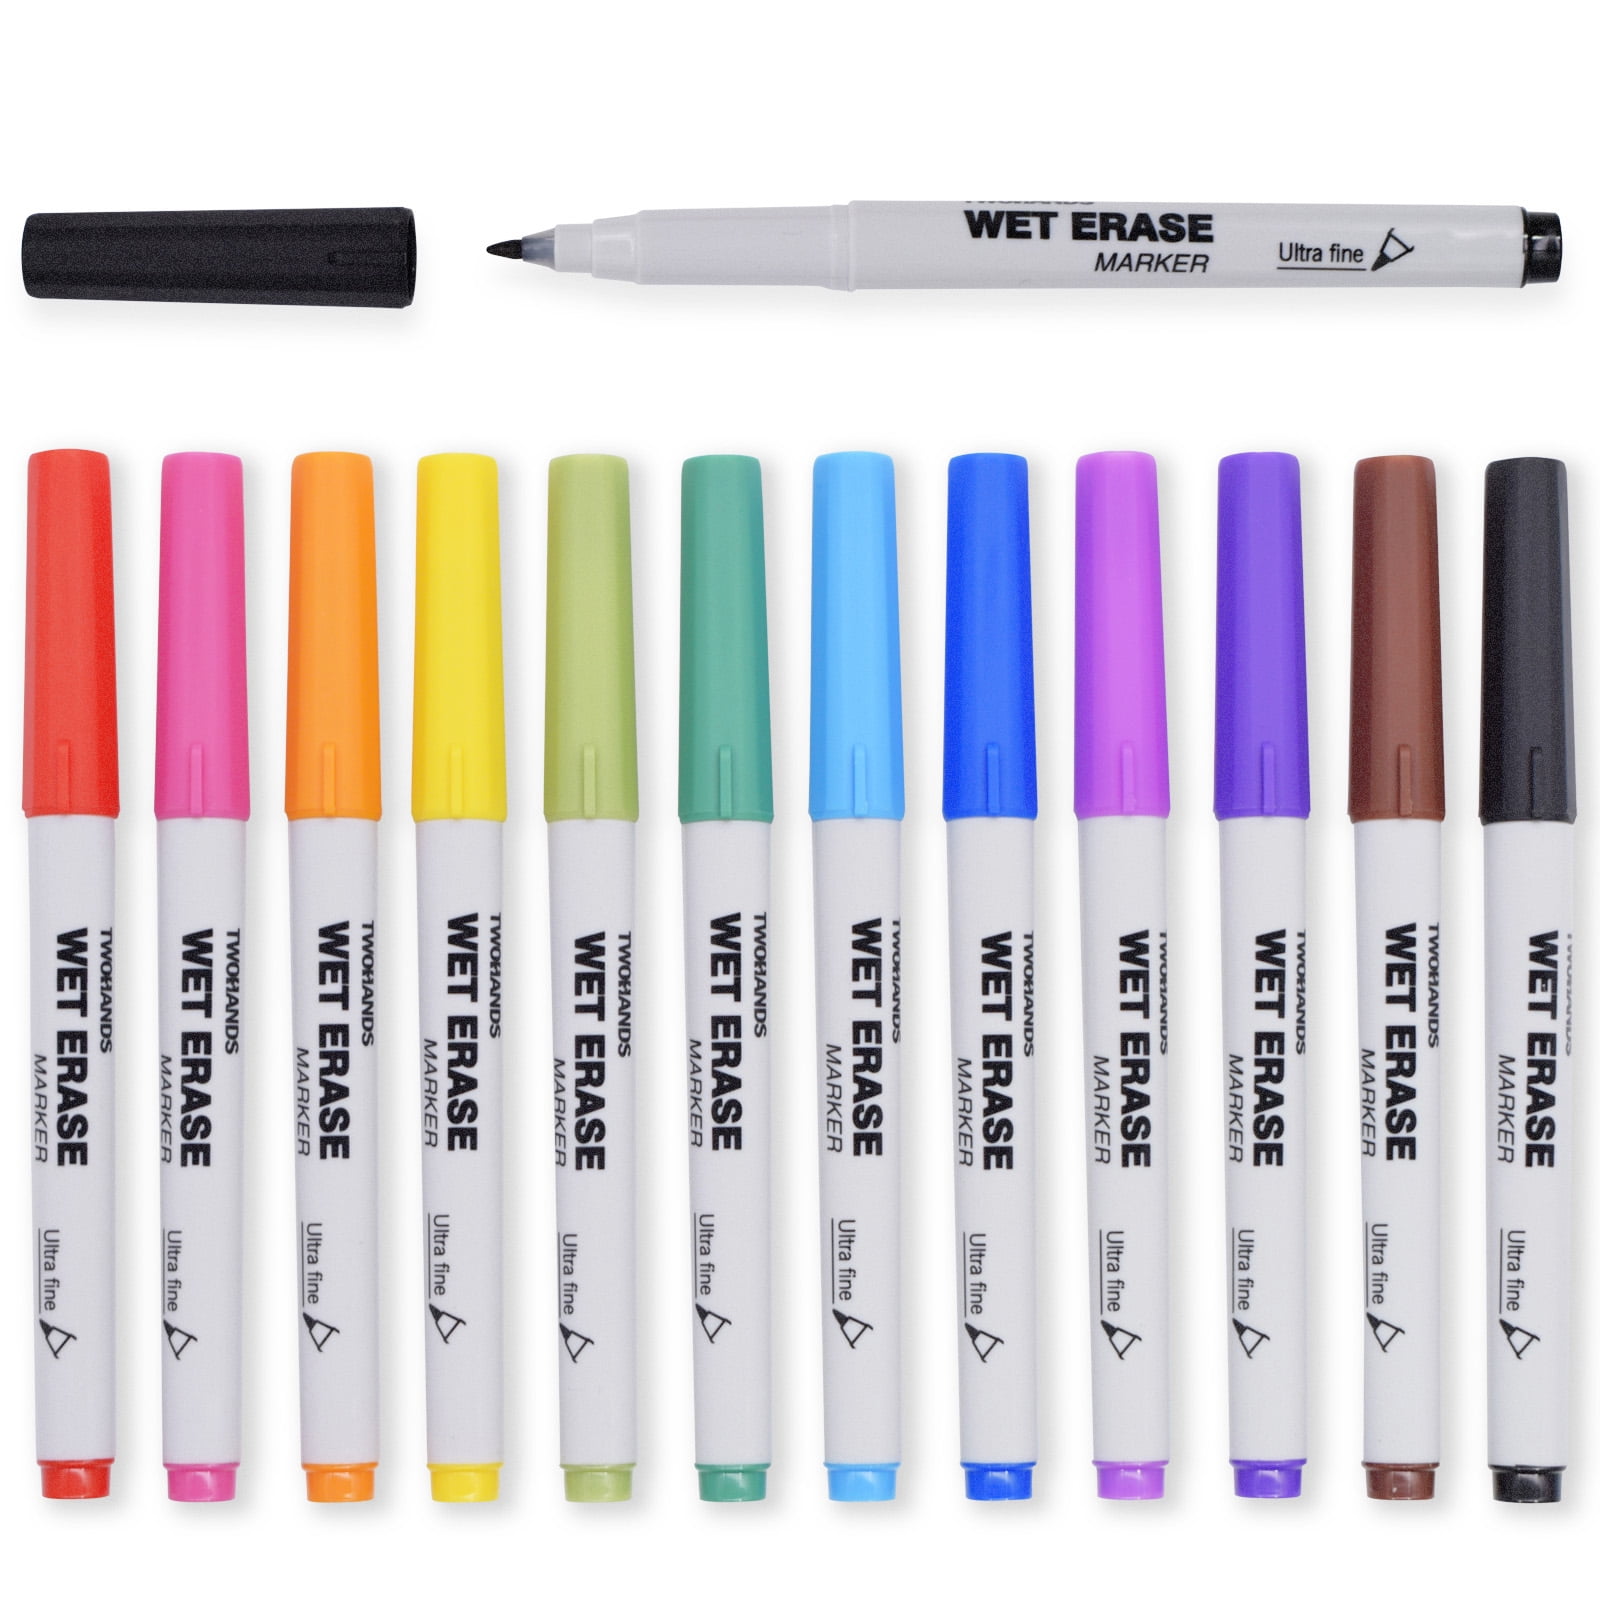 Maxtek Neon Dry Erase Markers,1mm Fine Point, Assorted Colors,9 Count 